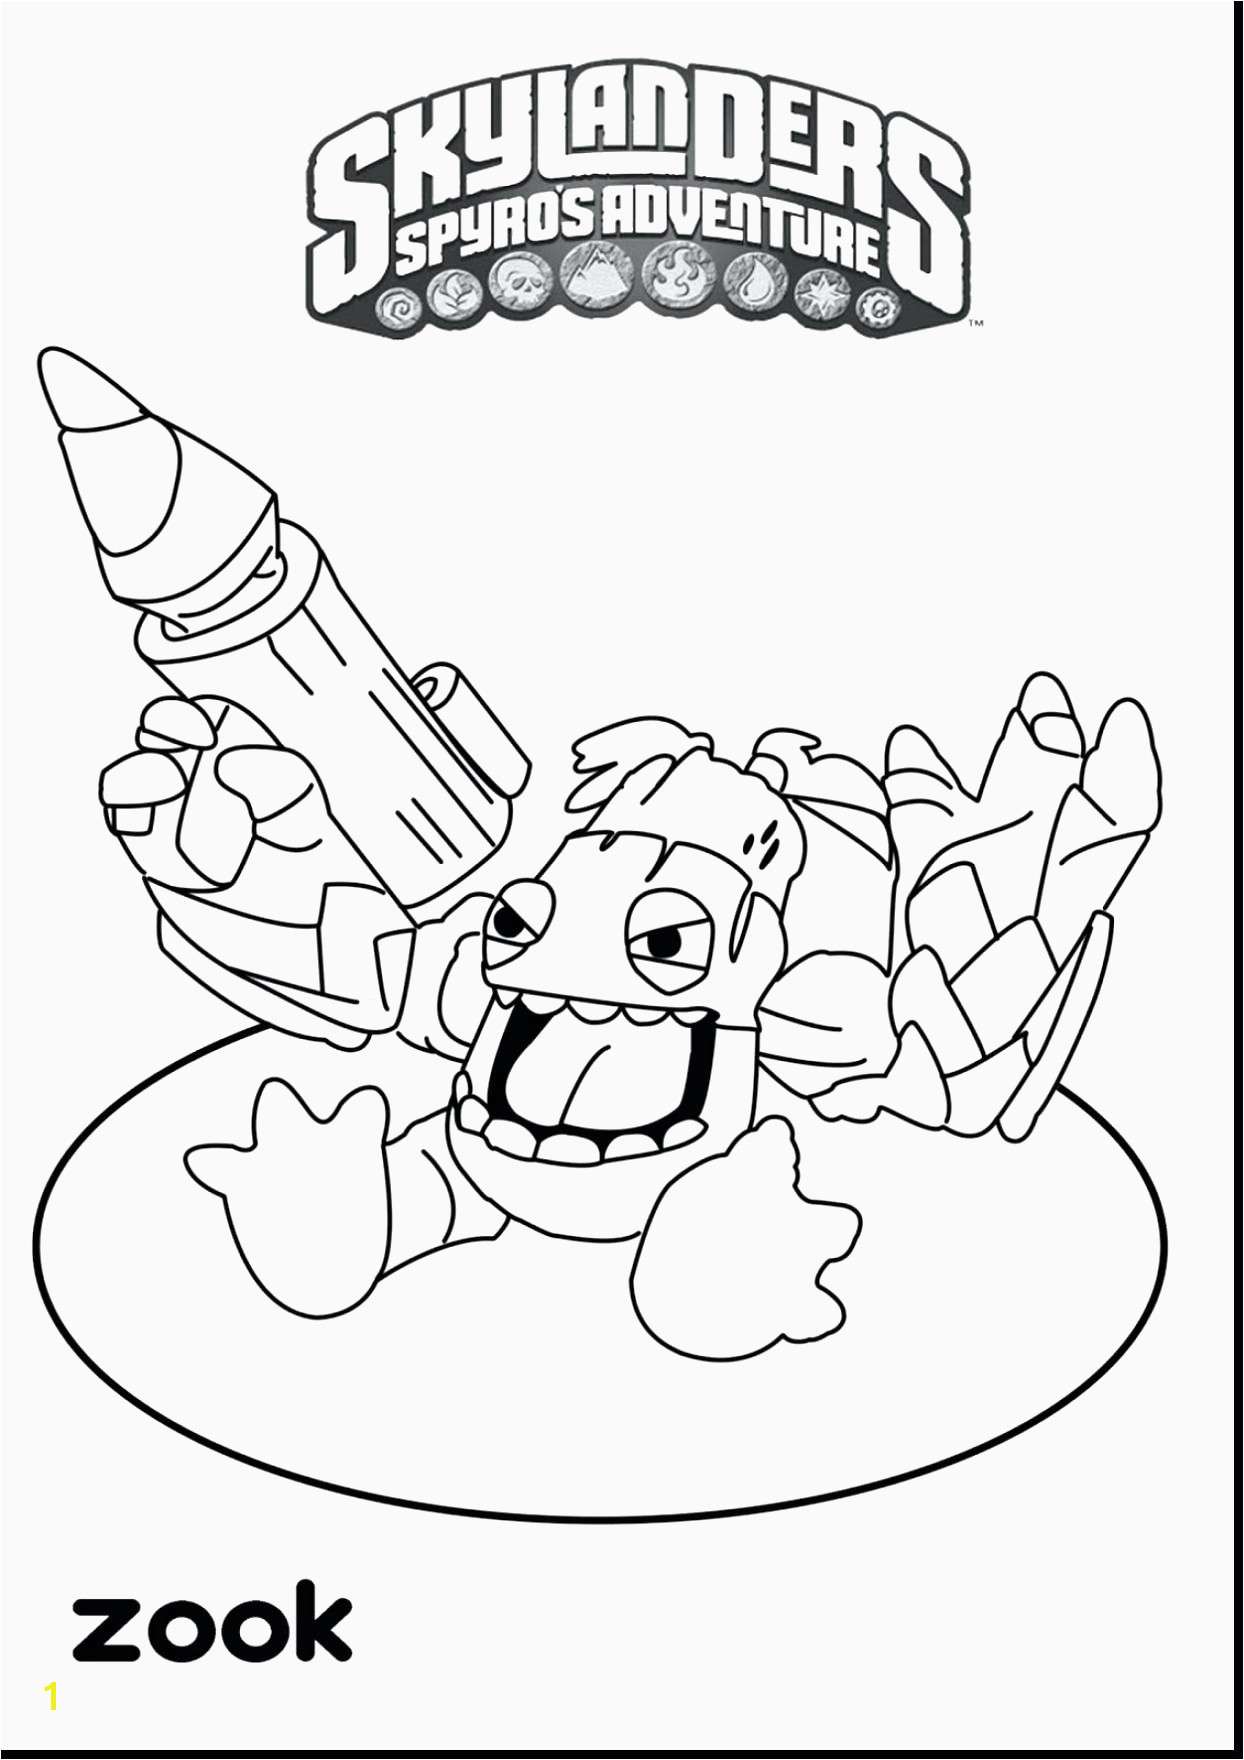 Batmobile Coloring Pages Best the Joker Coloring Pages Suicide Squad Harley Quinn Coloring Pages